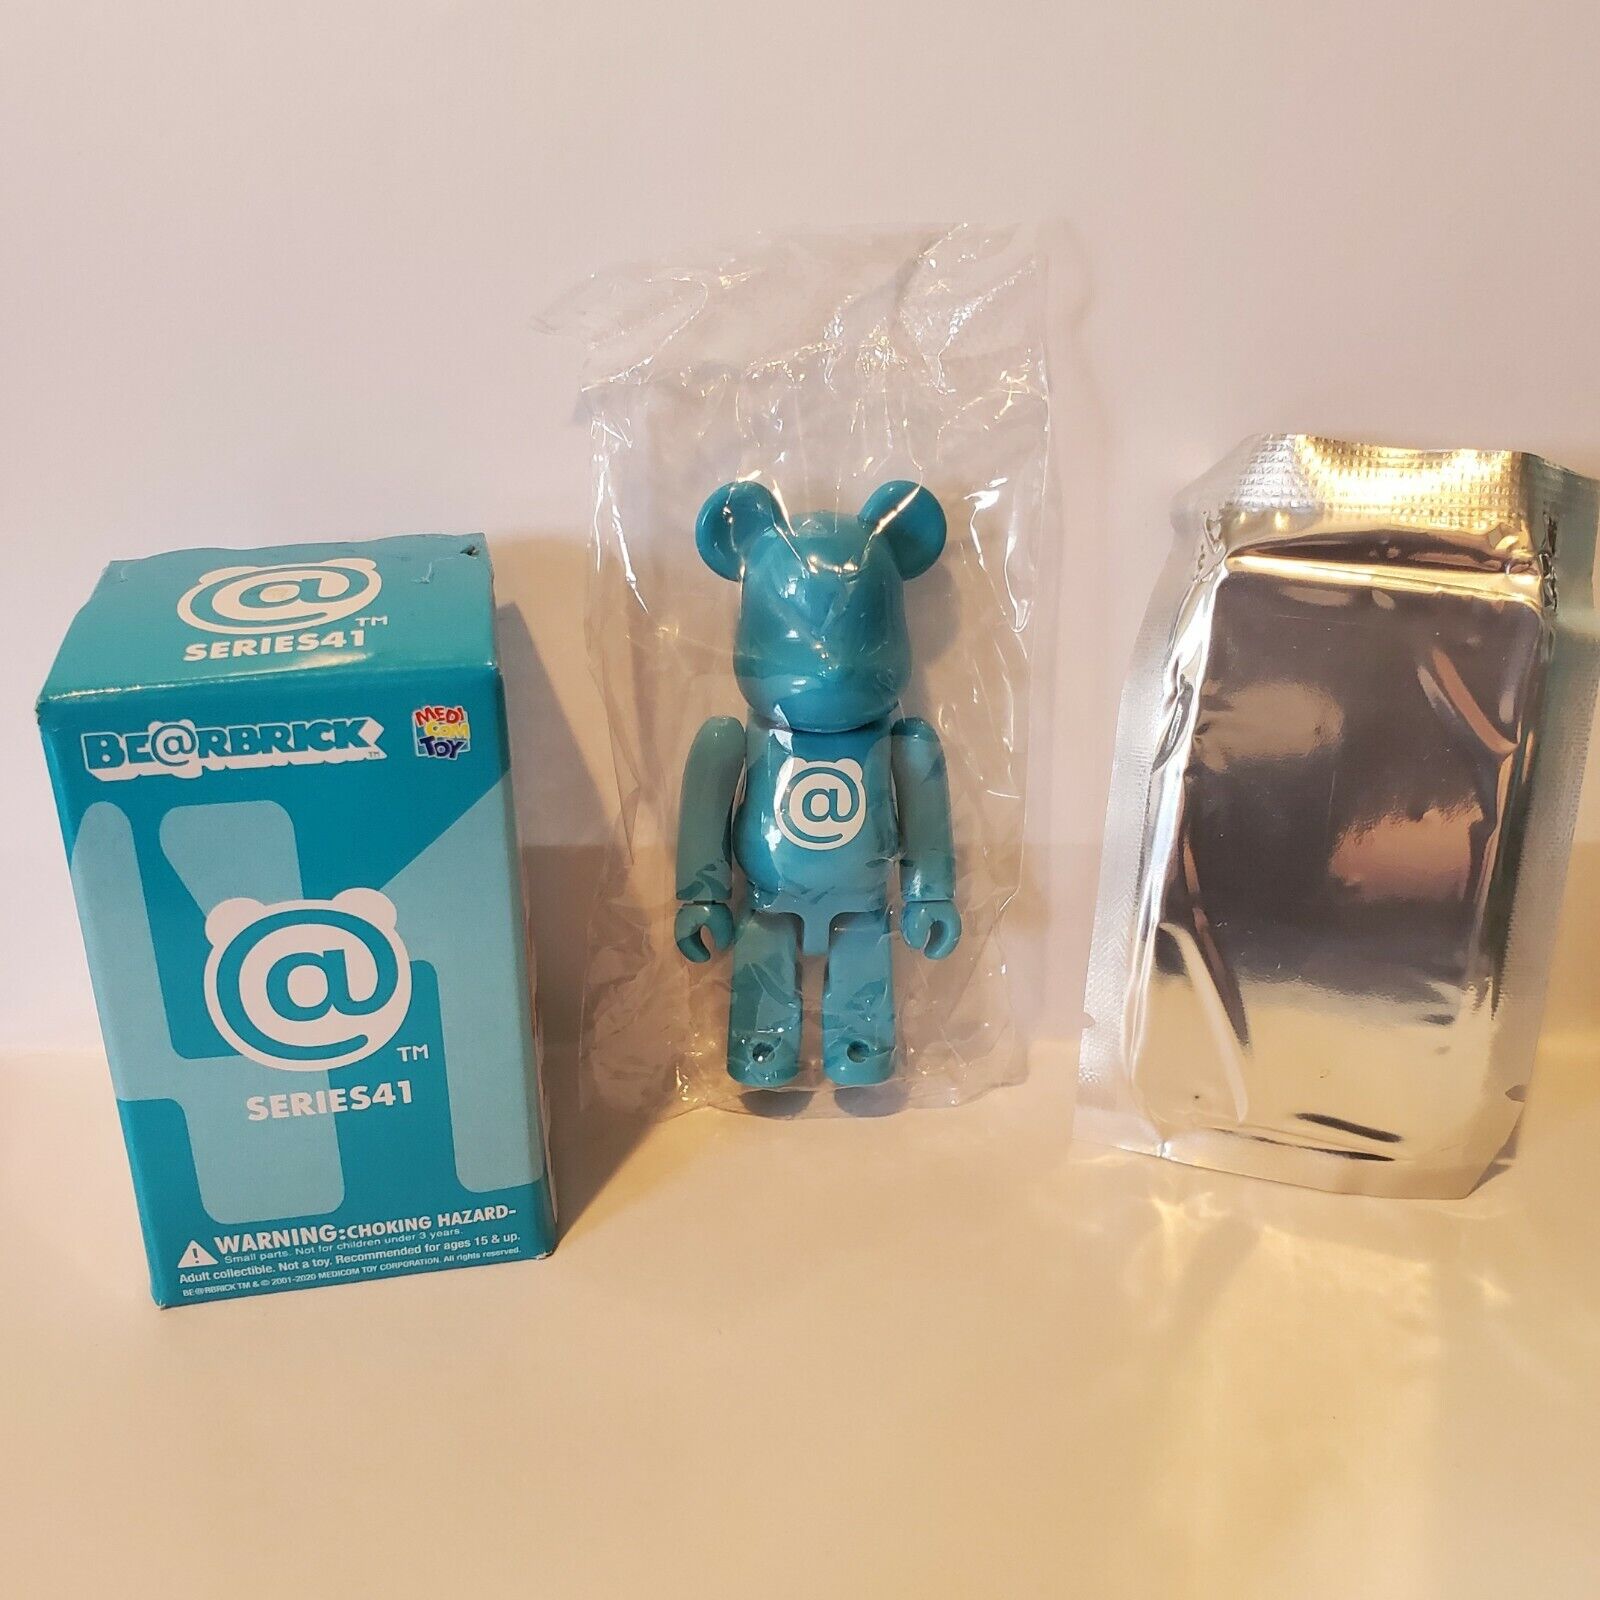 Bearbrick Be@rbrick Series 41 100% by Medicom - You pick - Fast US Shipping.